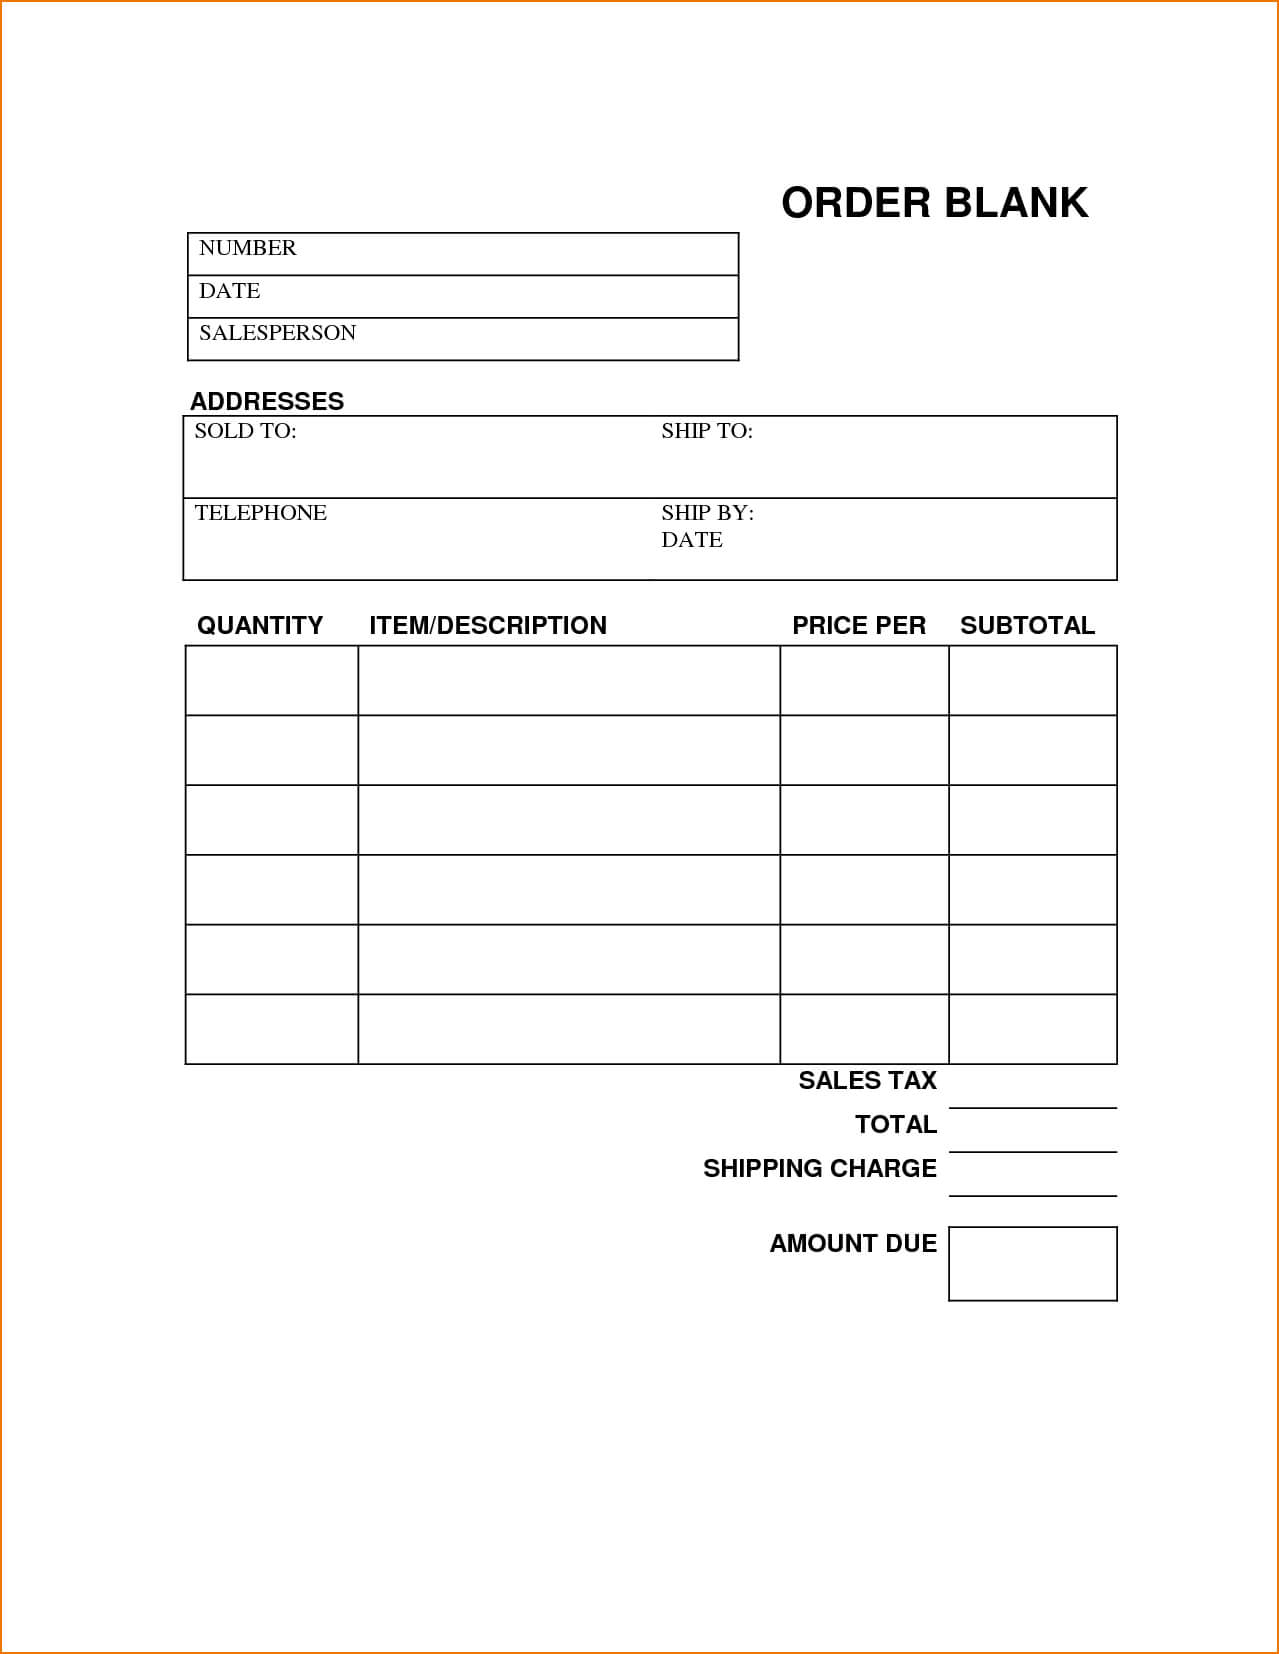 013 Blank Order Form Template Free Html Templates Staggering With Regard To Blank Html Templates Free Download